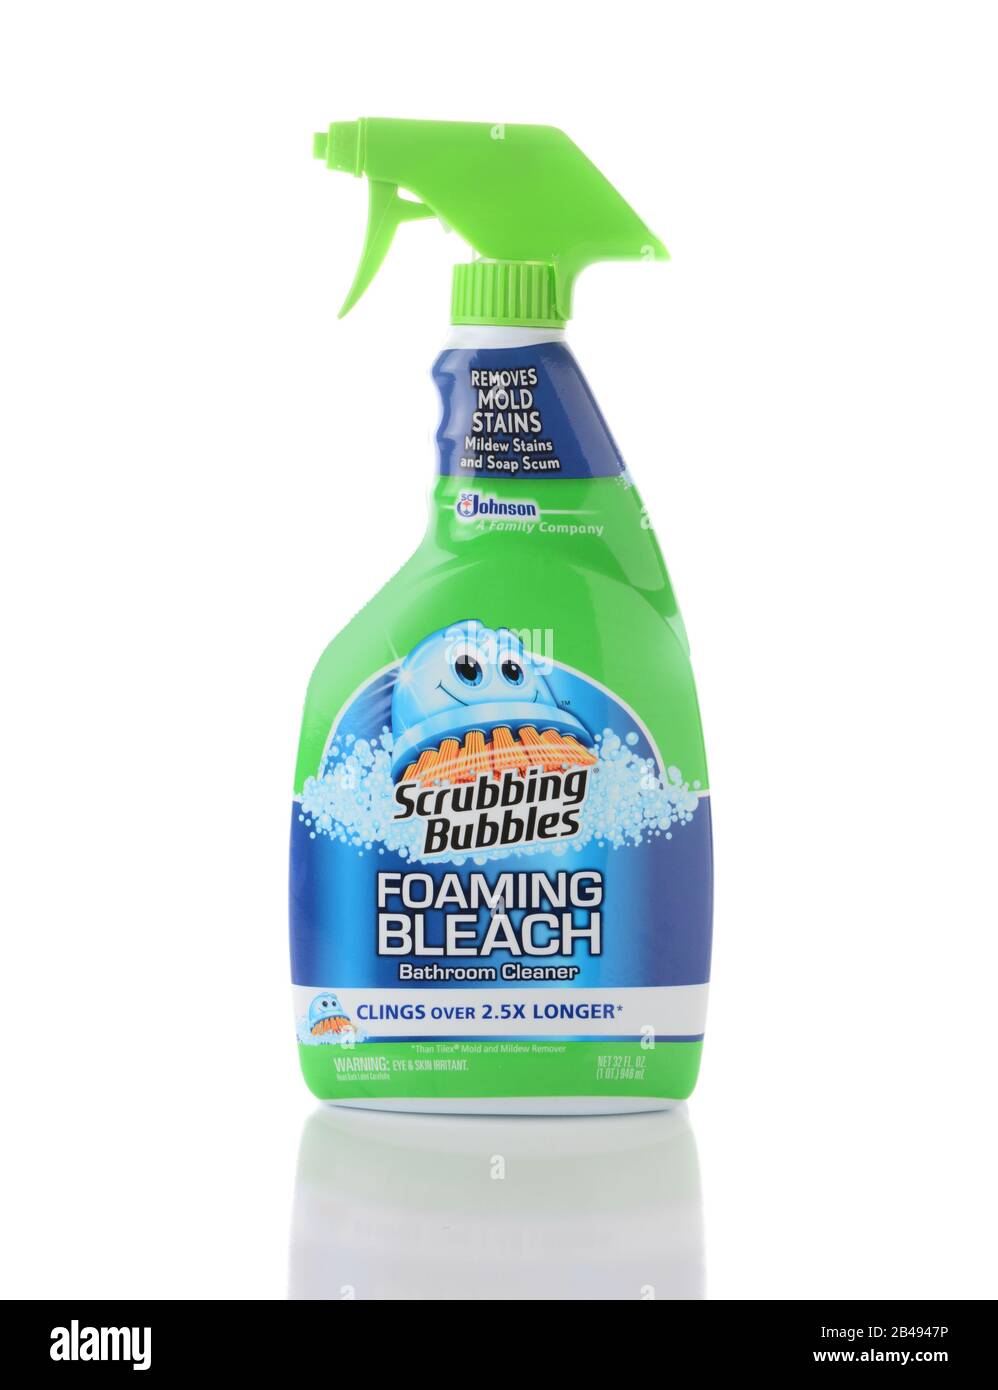 IRVINE, CA - JUNE 2, 2015: A bottle of Scrubbing Bubbles Foaming Bleach Bathroom Cleaner. Originally produced by Dow Chemical the brand is now owned b Stock Photo